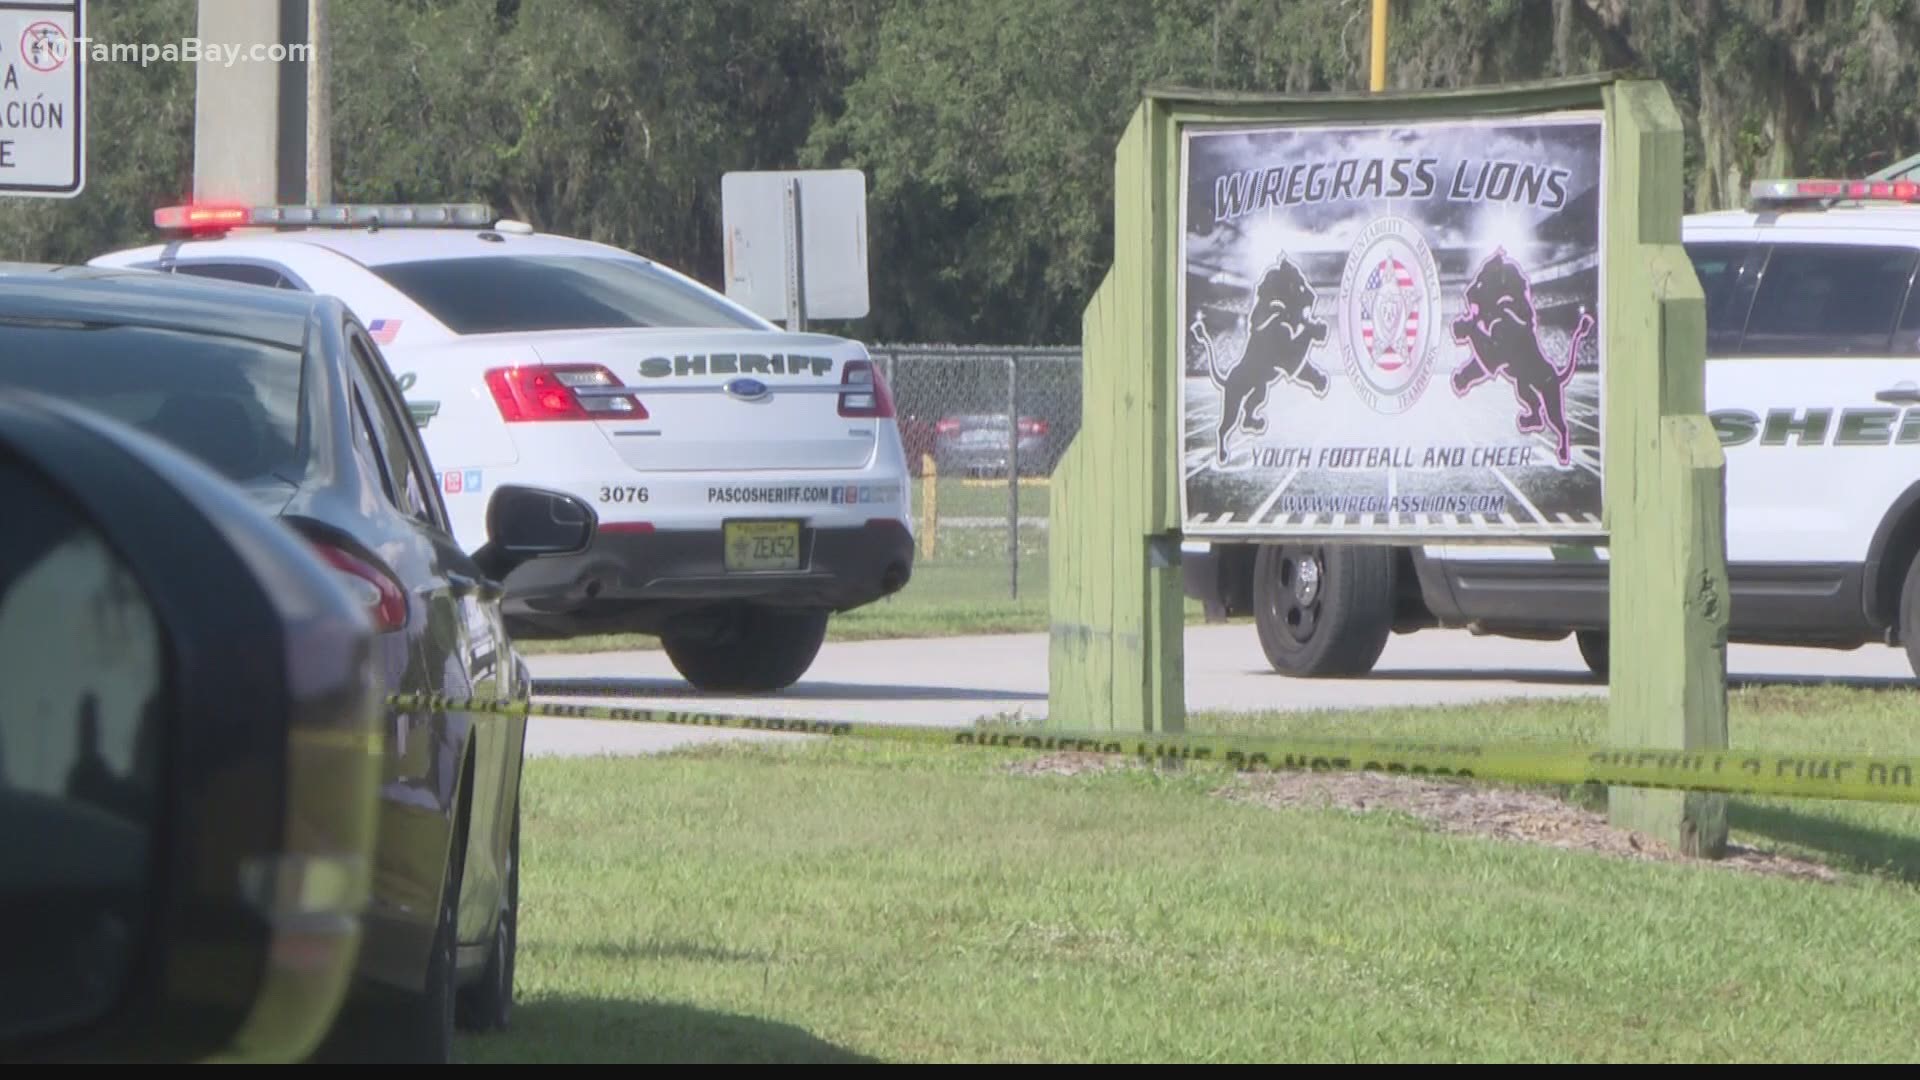 Families were at the Samuel Pasco Athletic Park at the time of the shooting, according to a 10 Tampa Bay employee.